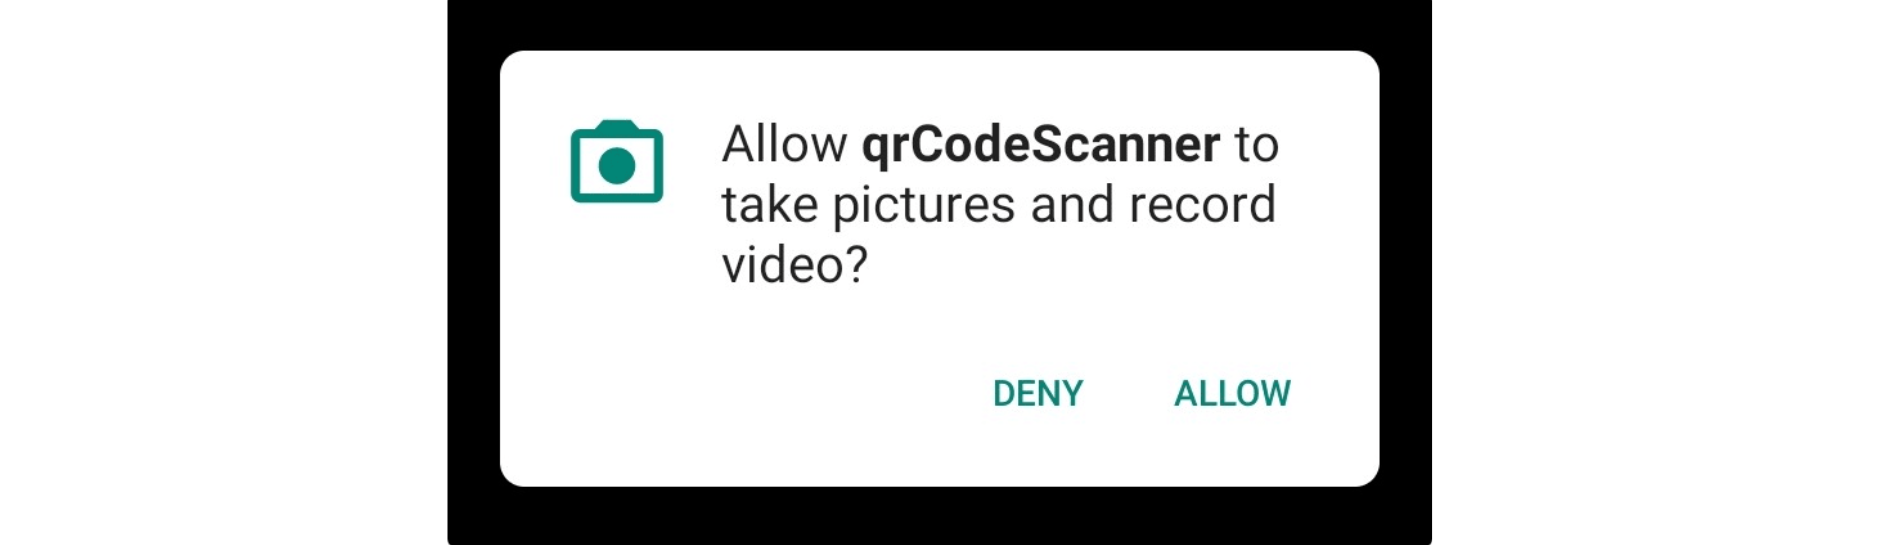 React-Native-Camera-Permissions-to-allow-qrCodeScanner